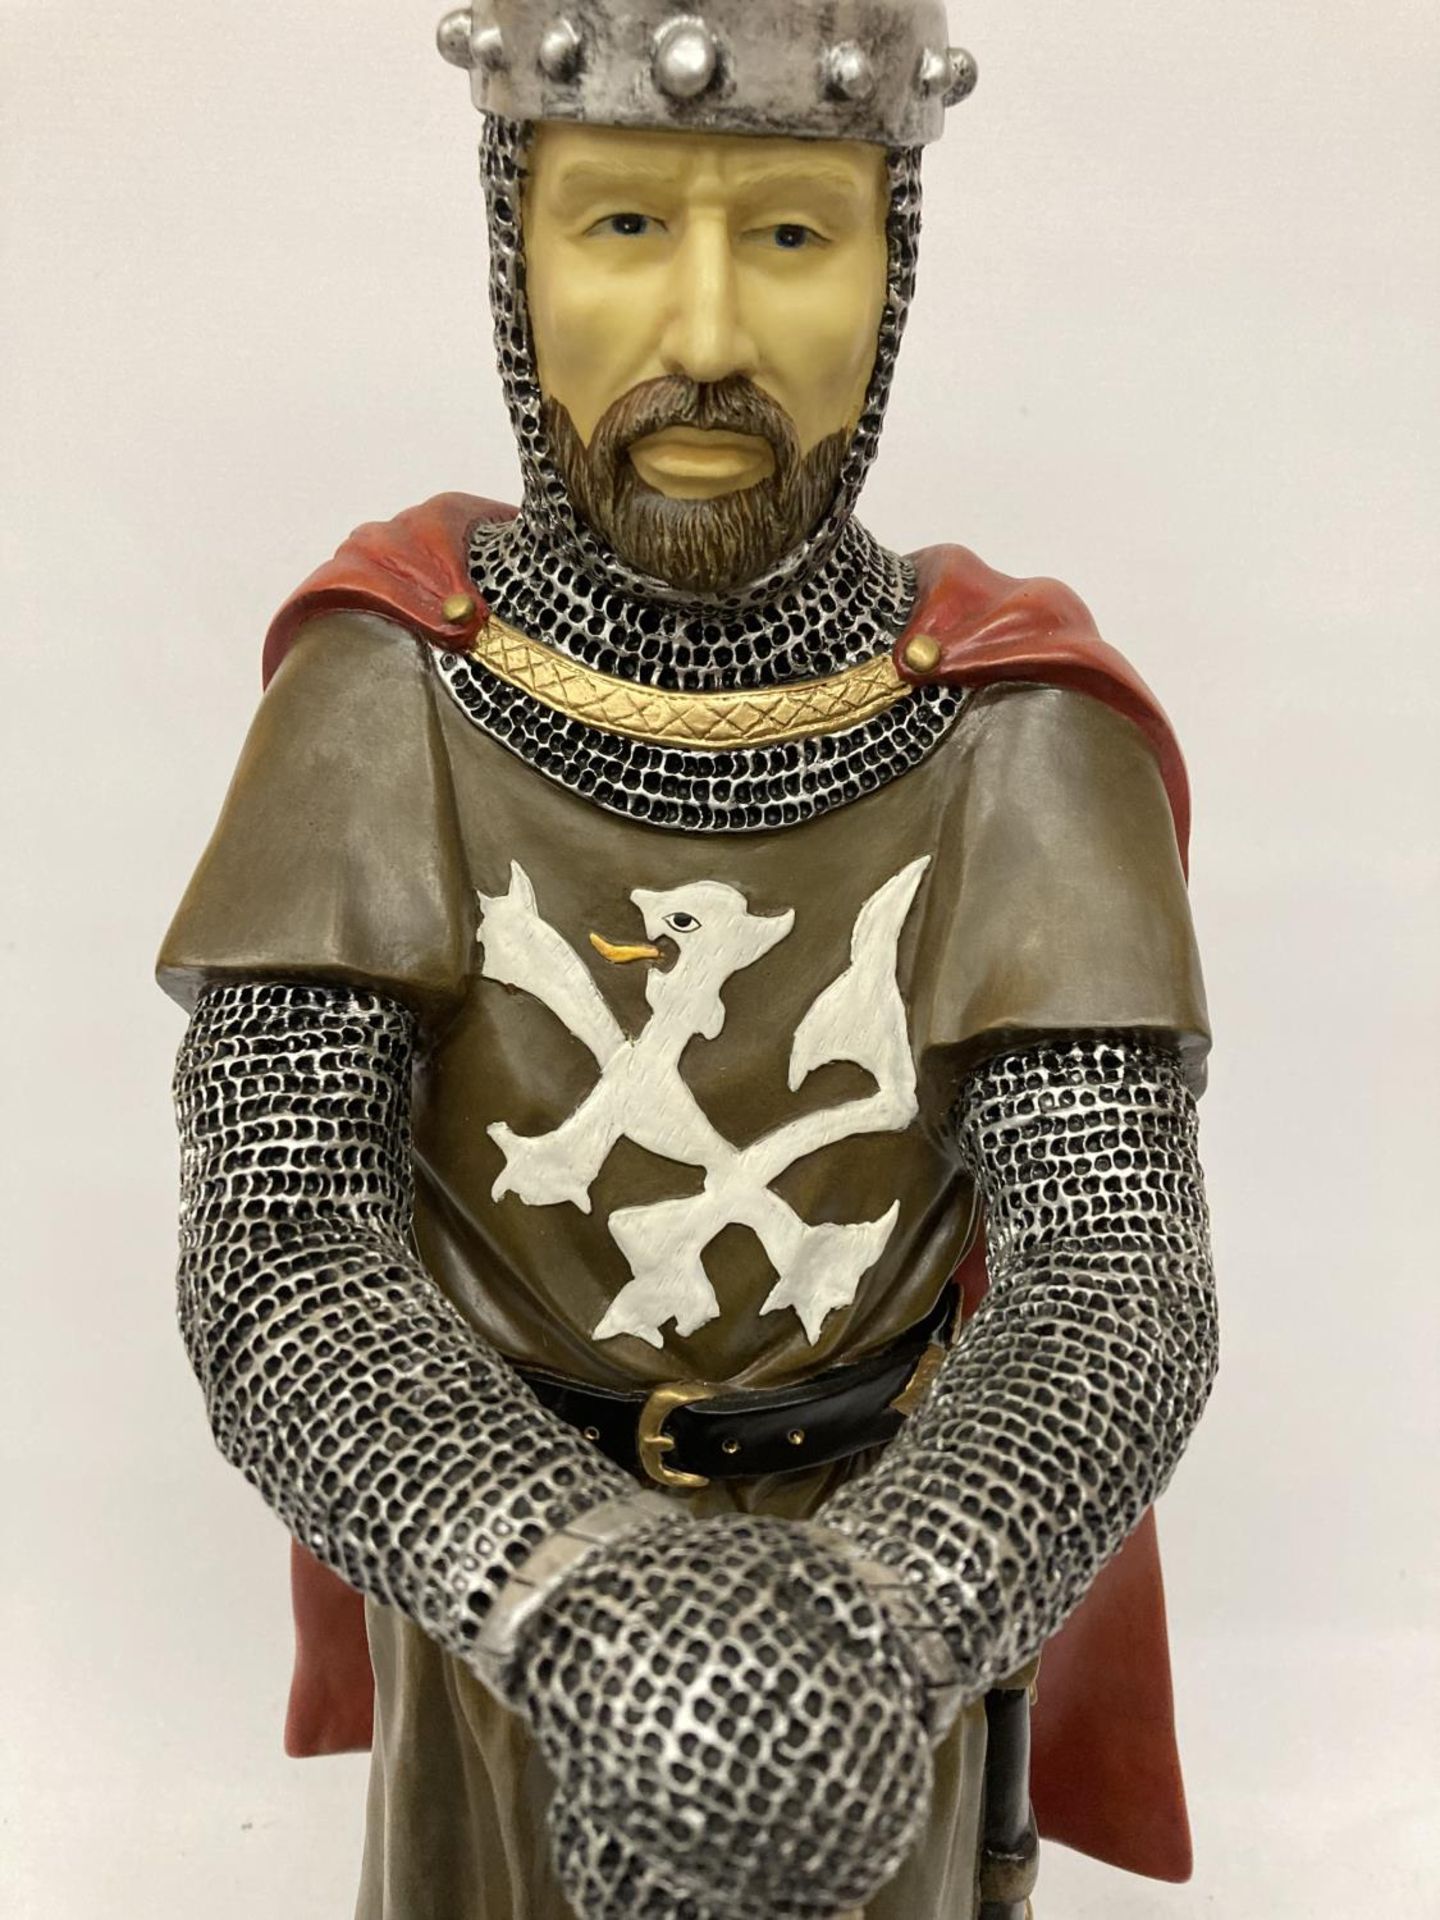 A LARGE KING ARTHUR FIGURE, HEIGHT APPROX 60CM - Image 6 of 6